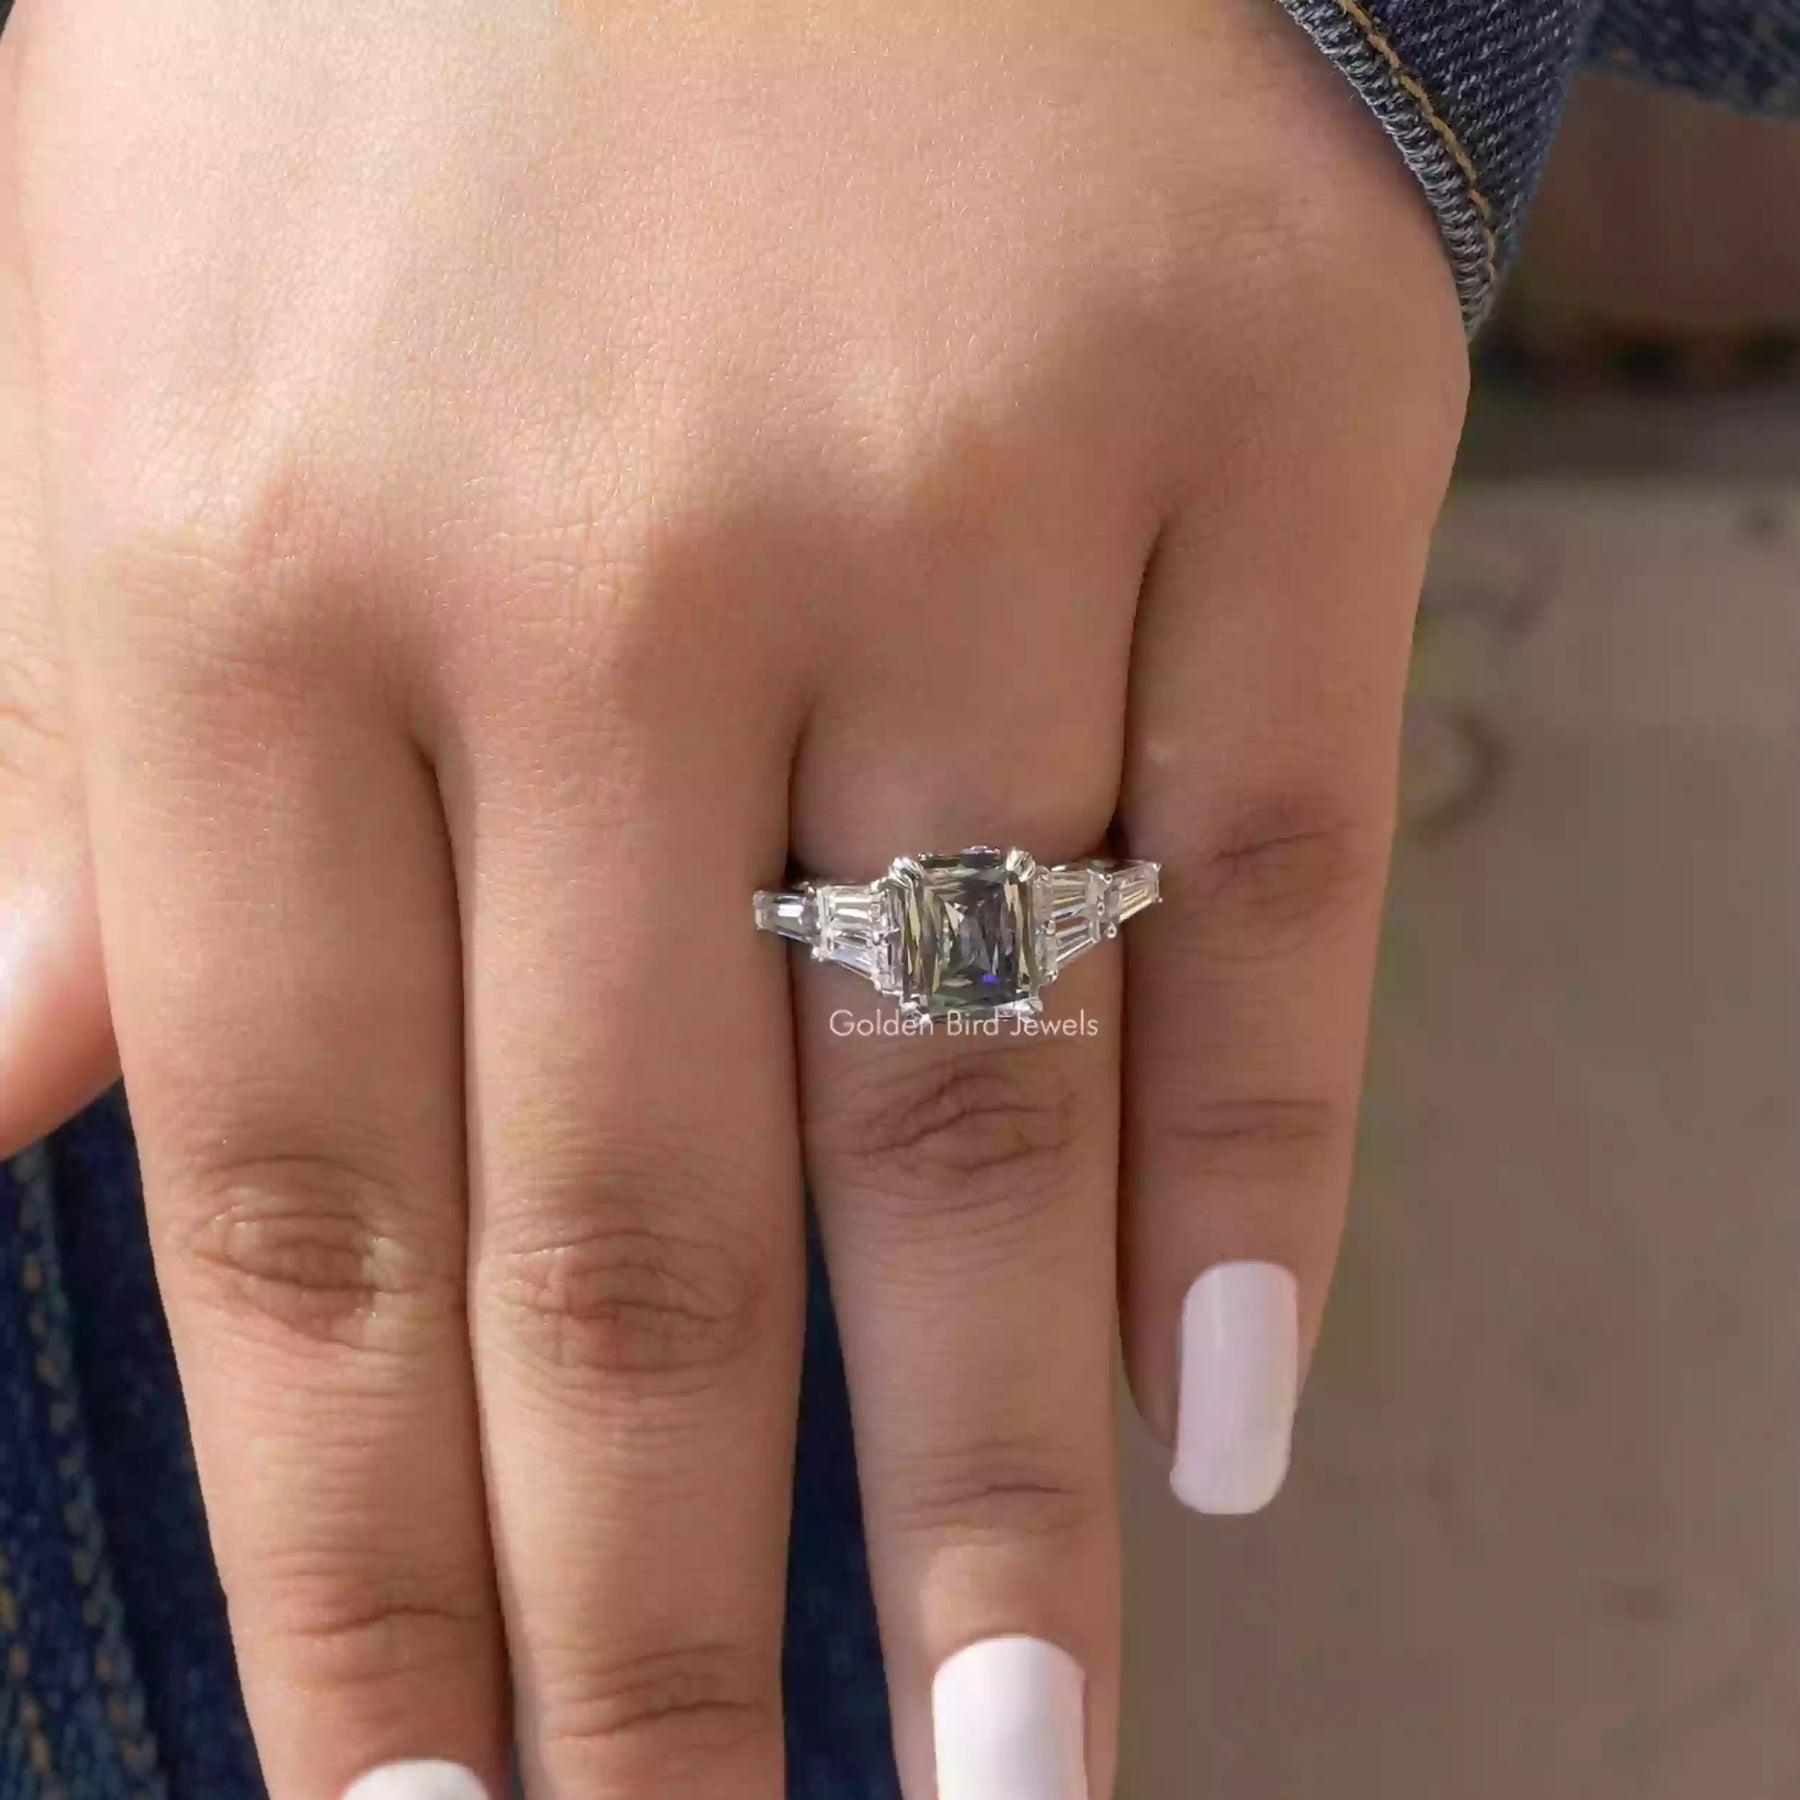 [In finger front view of grey criss cut engagement ring made of white gold and double prongs]-[Golden Bird Jewels]